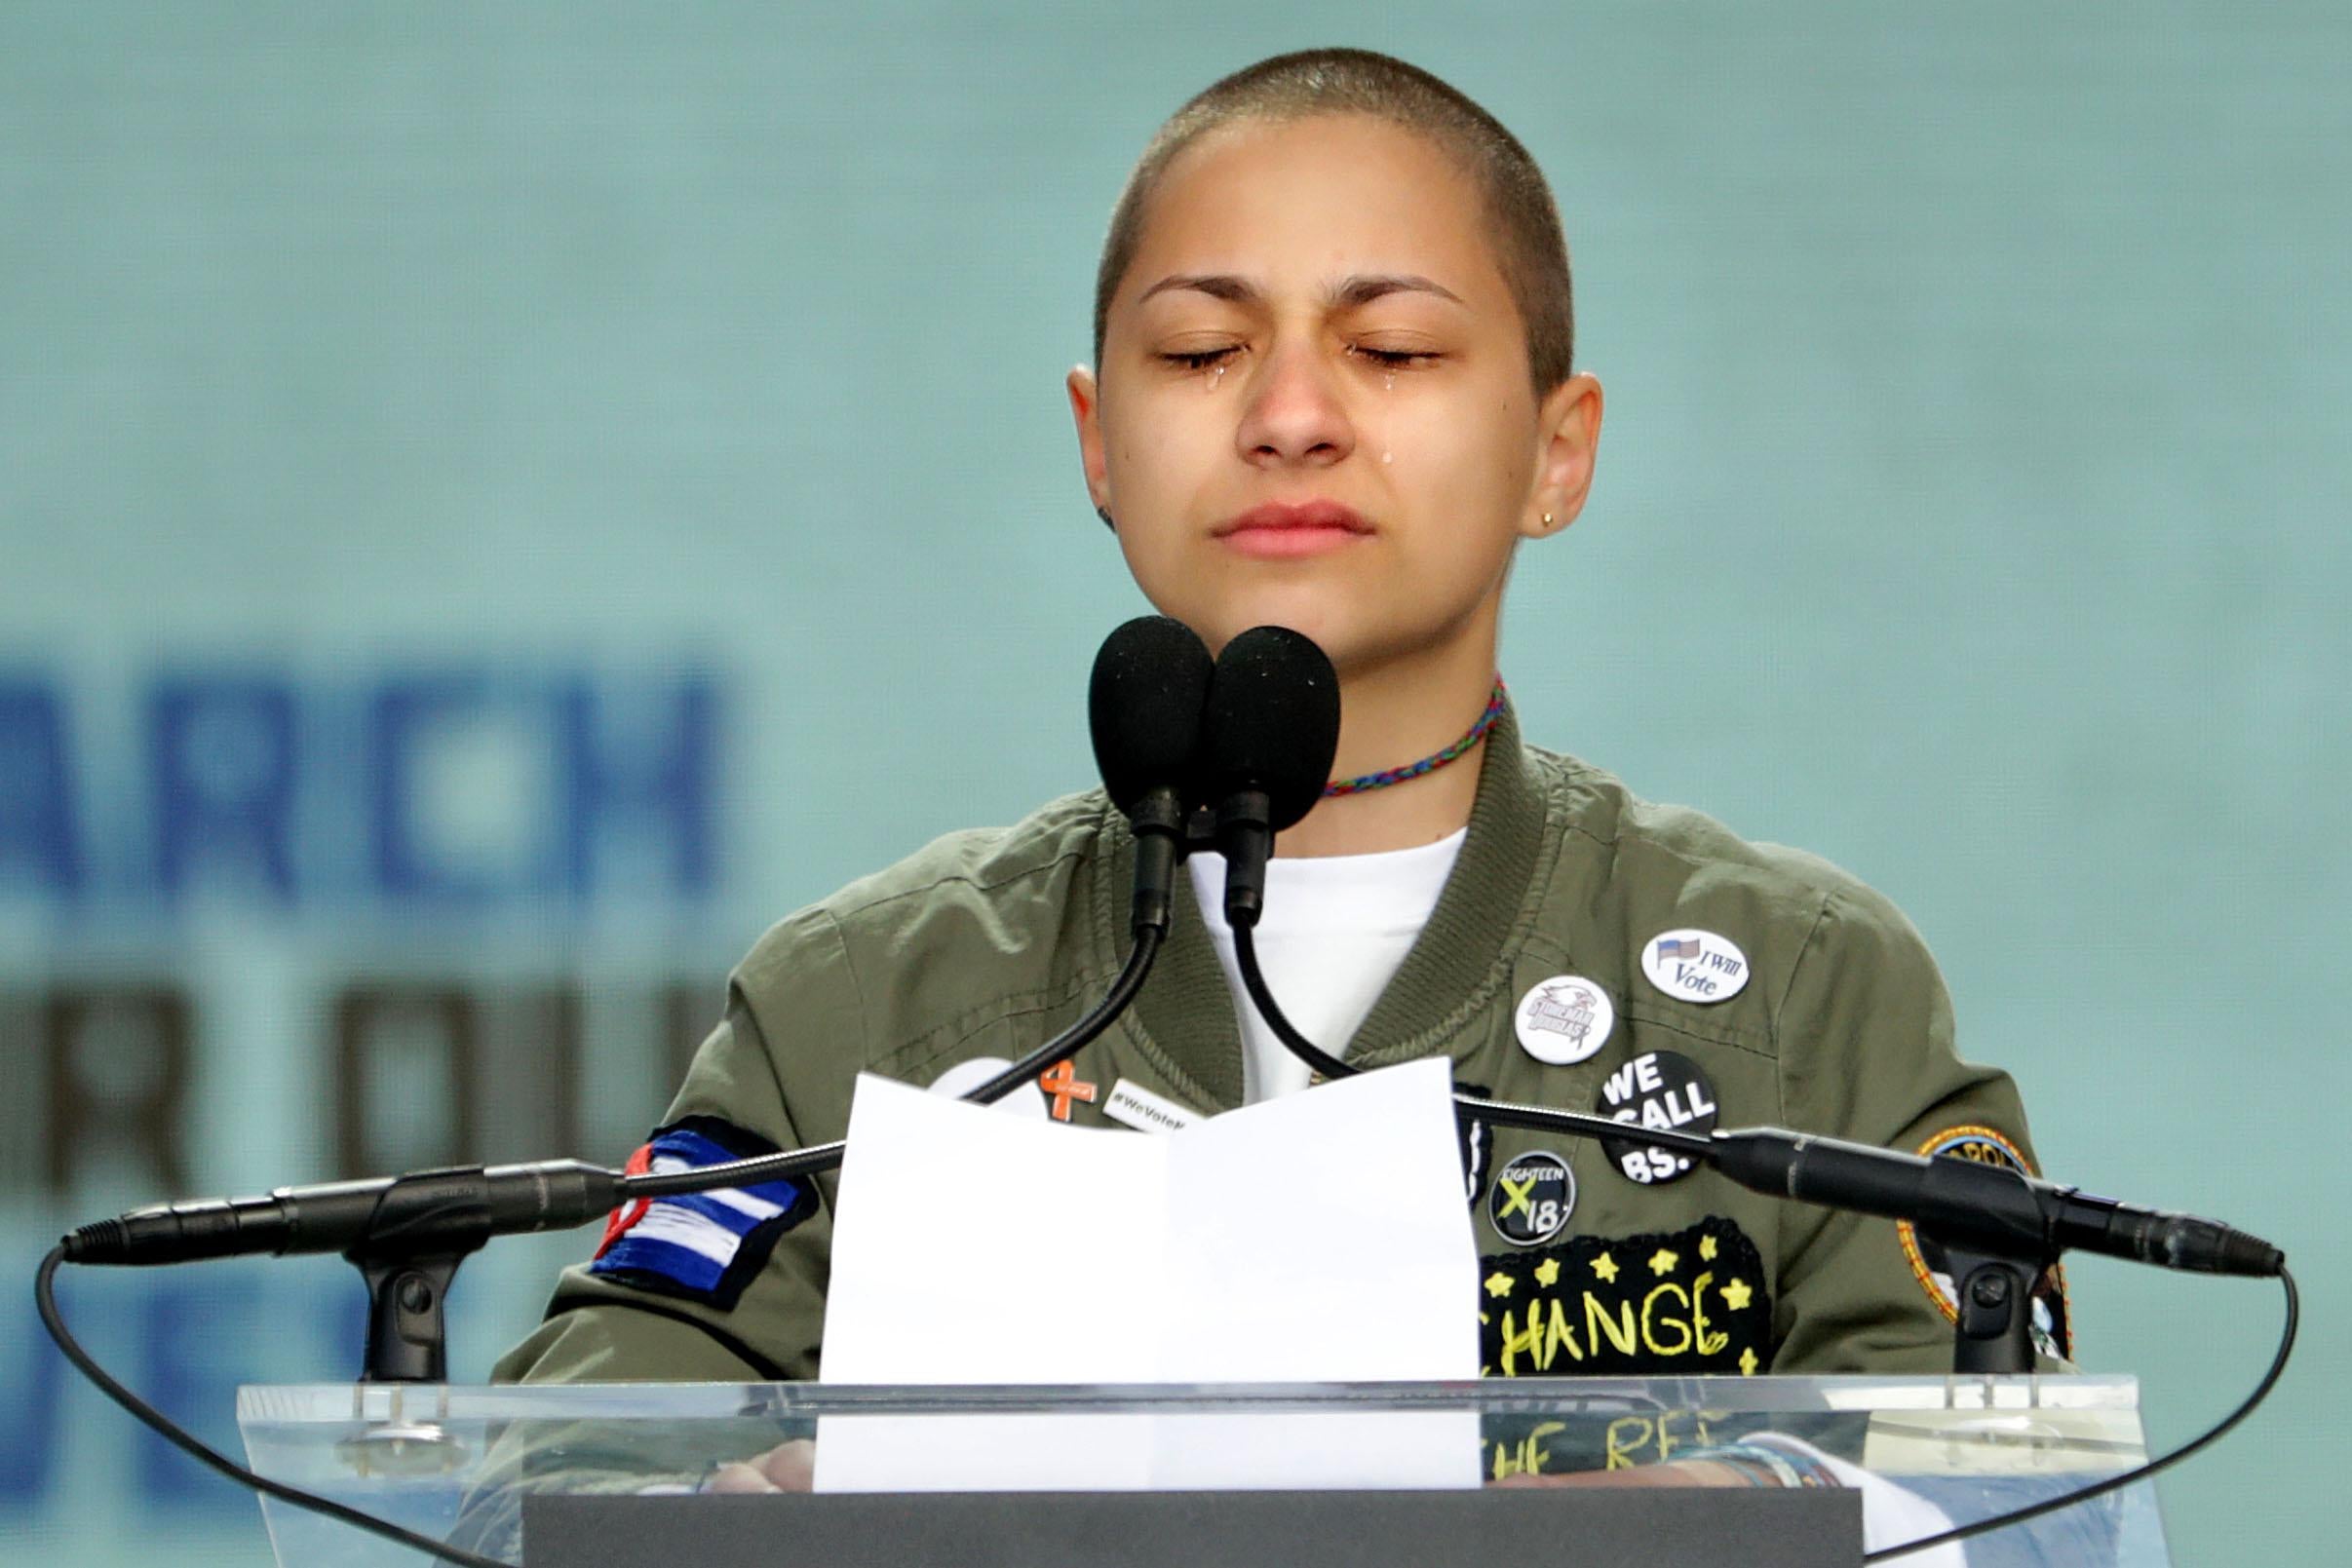 WASHINGTON, DC - MARCH 24:  Tears roll down the face of Marjory Stoneman Douglas High School student Emma Gonzalez as she observes 6 minutes and 20 seconds of silence while addressing the March for Our Lives rally on March 24, 2018 in Washington, DC. Hundreds of thousands of demonstrators, including students, teachers and parents gathered in Washington for the anti-gun violence rally organized by survivors of the Marjory Stoneman Douglas High School shooting on February 14 that left 17 dead. More than 800 related events are taking place around the world to call for legislative action to address school safety and gun violence.  (Photo by Chip Somodevilla/Getty Images)